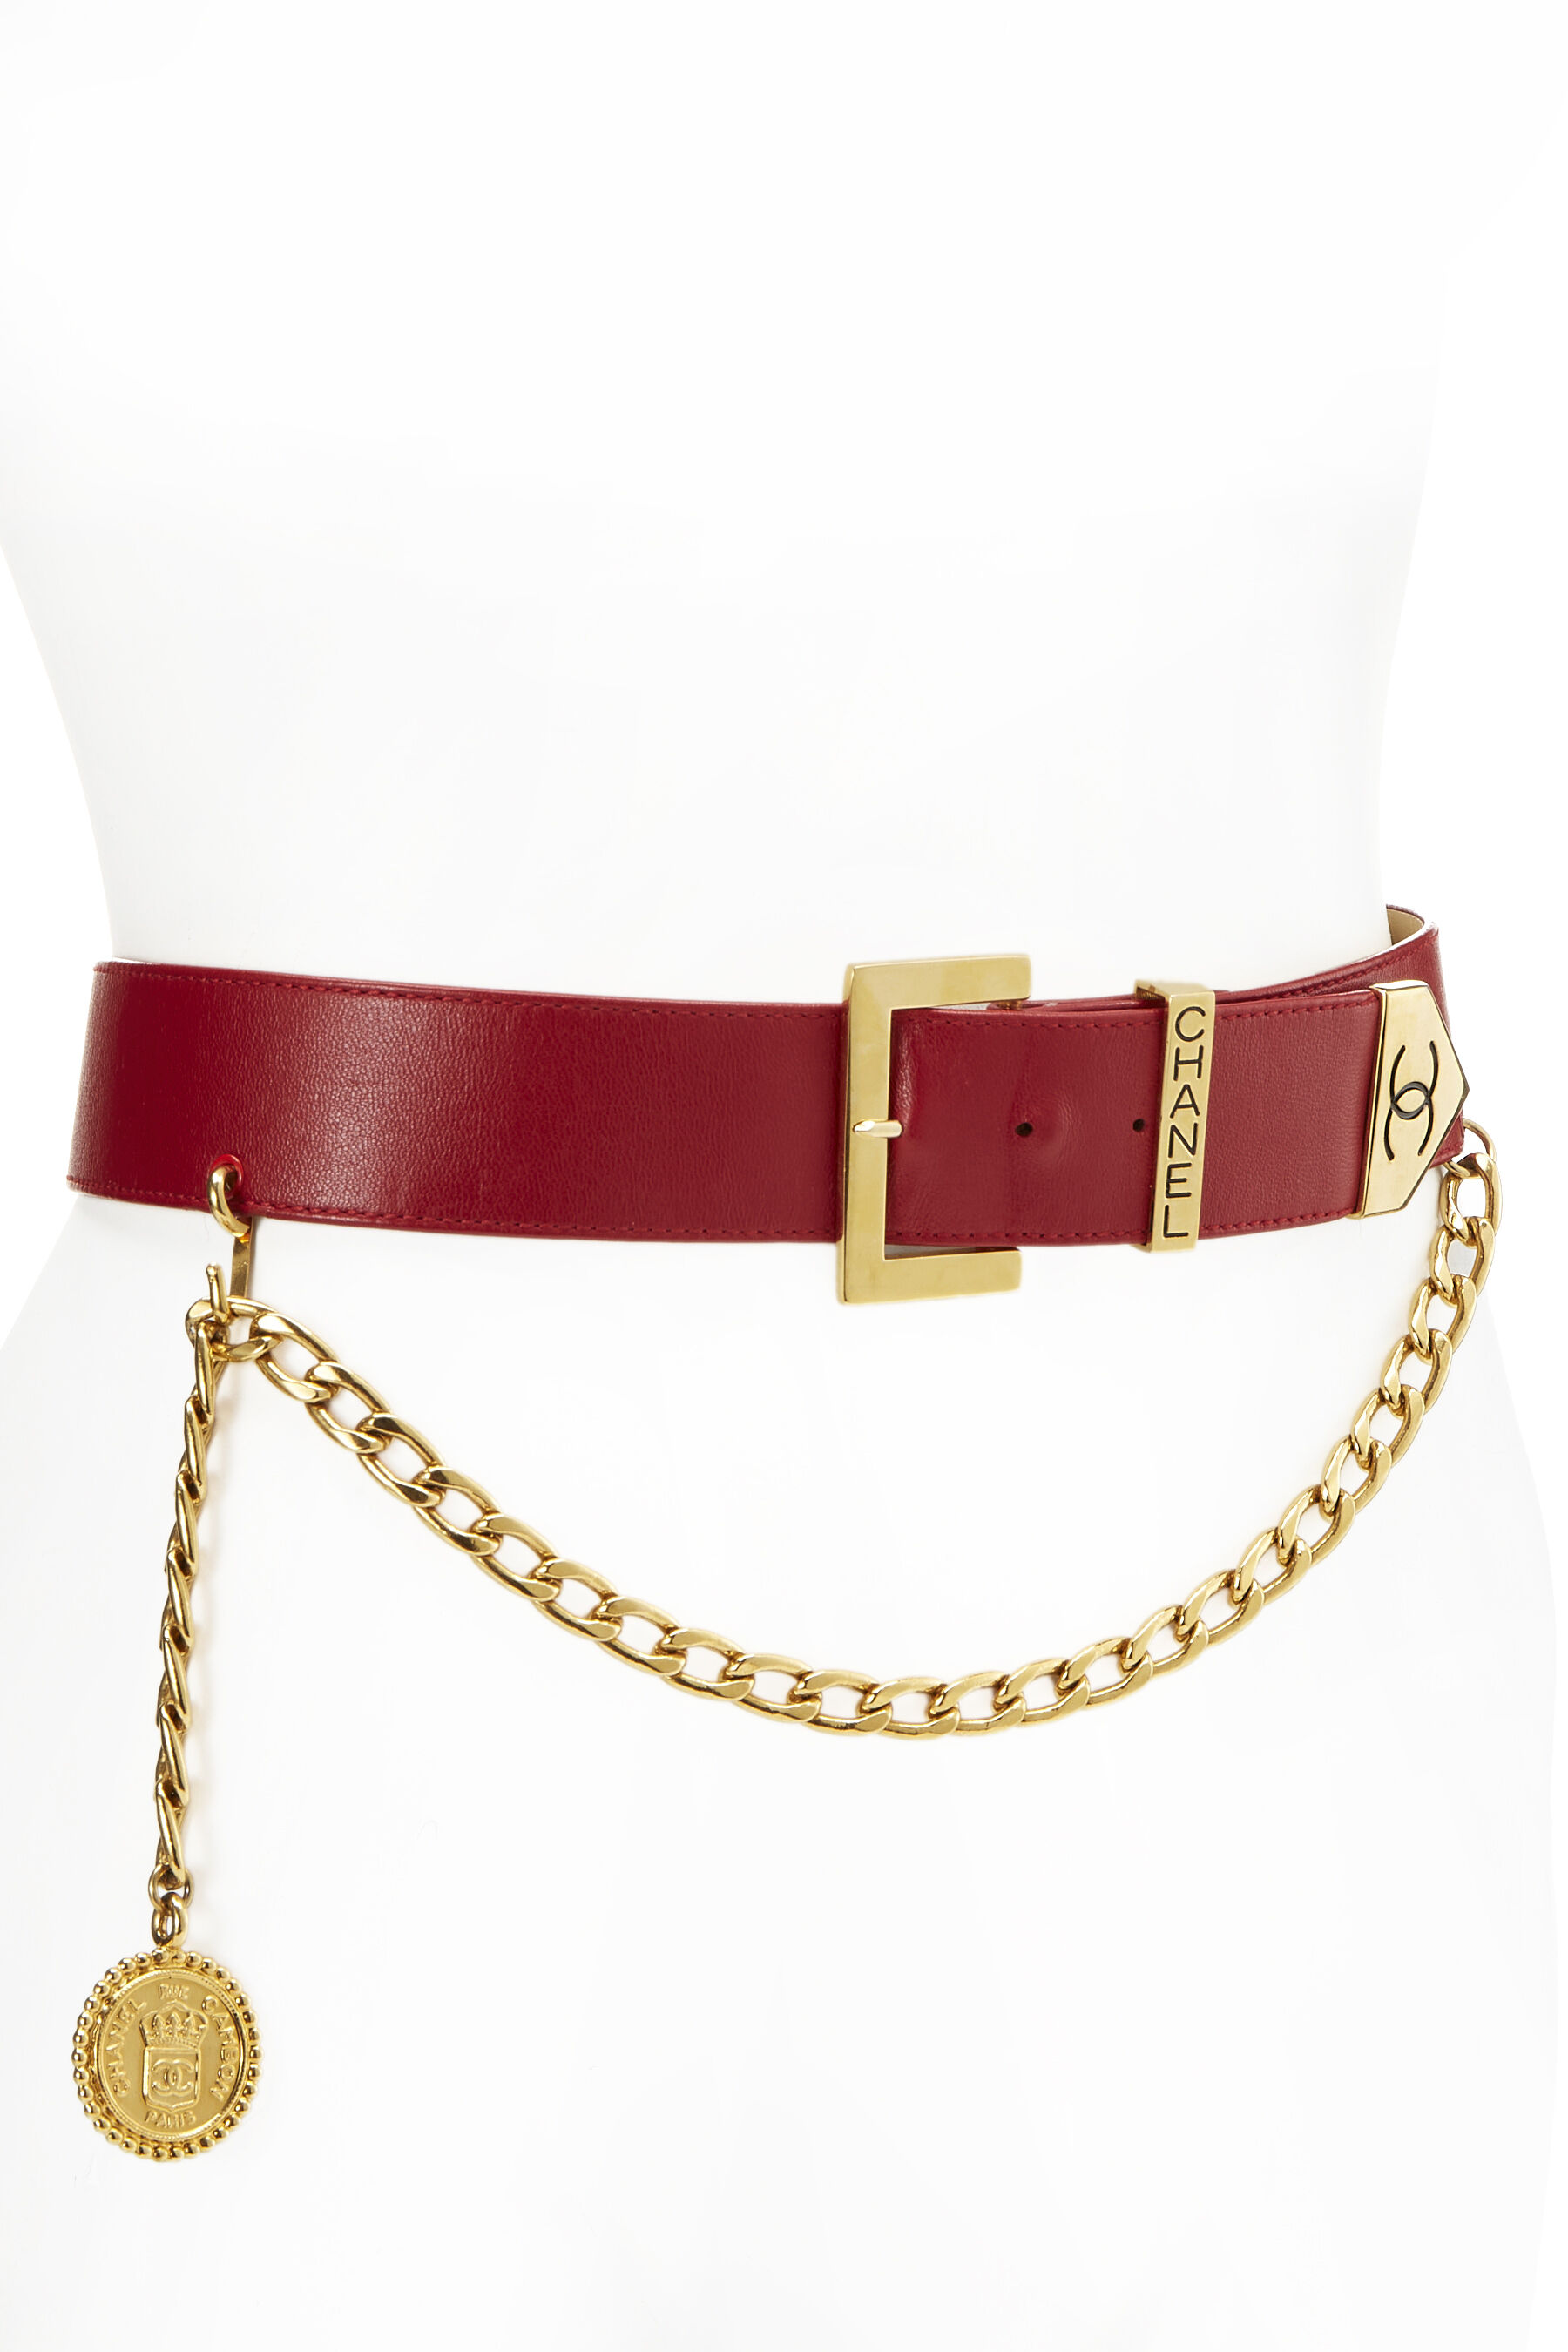 Chanel - Red Leather Waist Belt 85